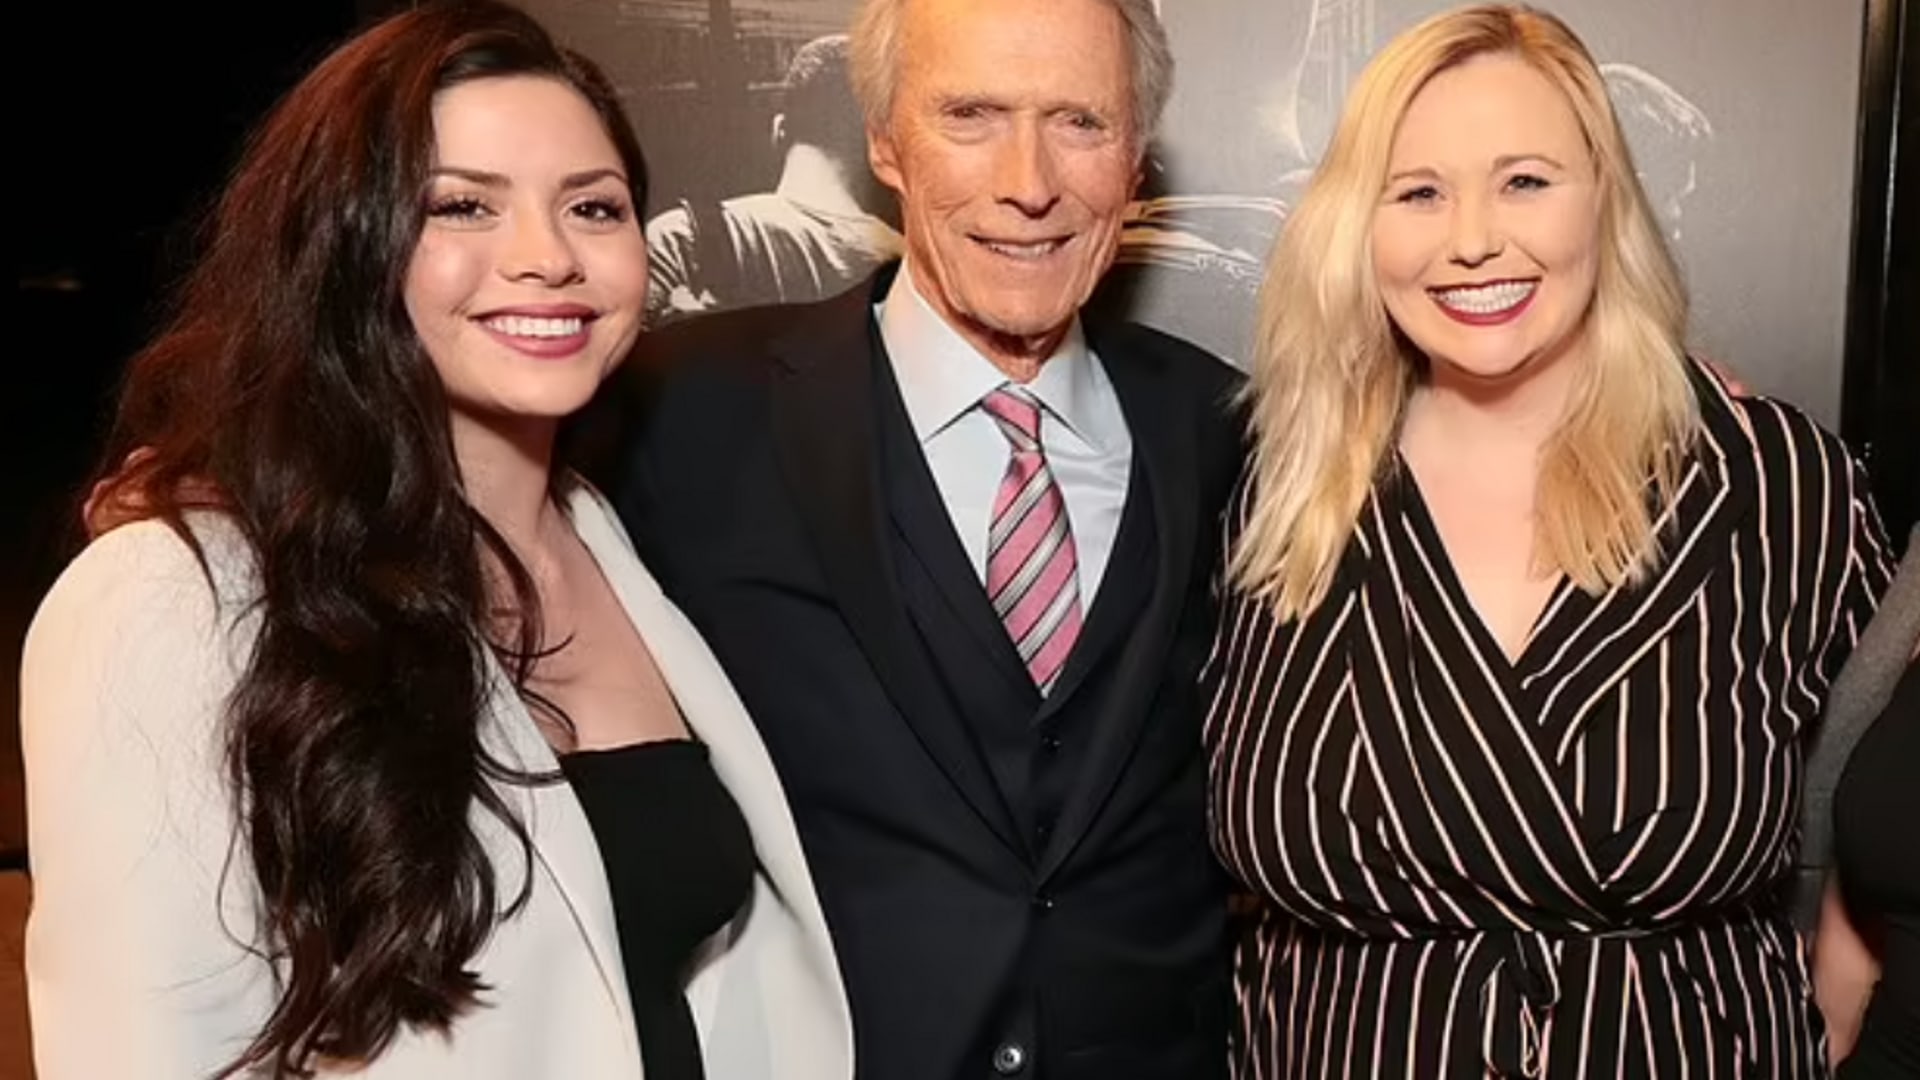 Clint with his daughters Morgan and Kathryn